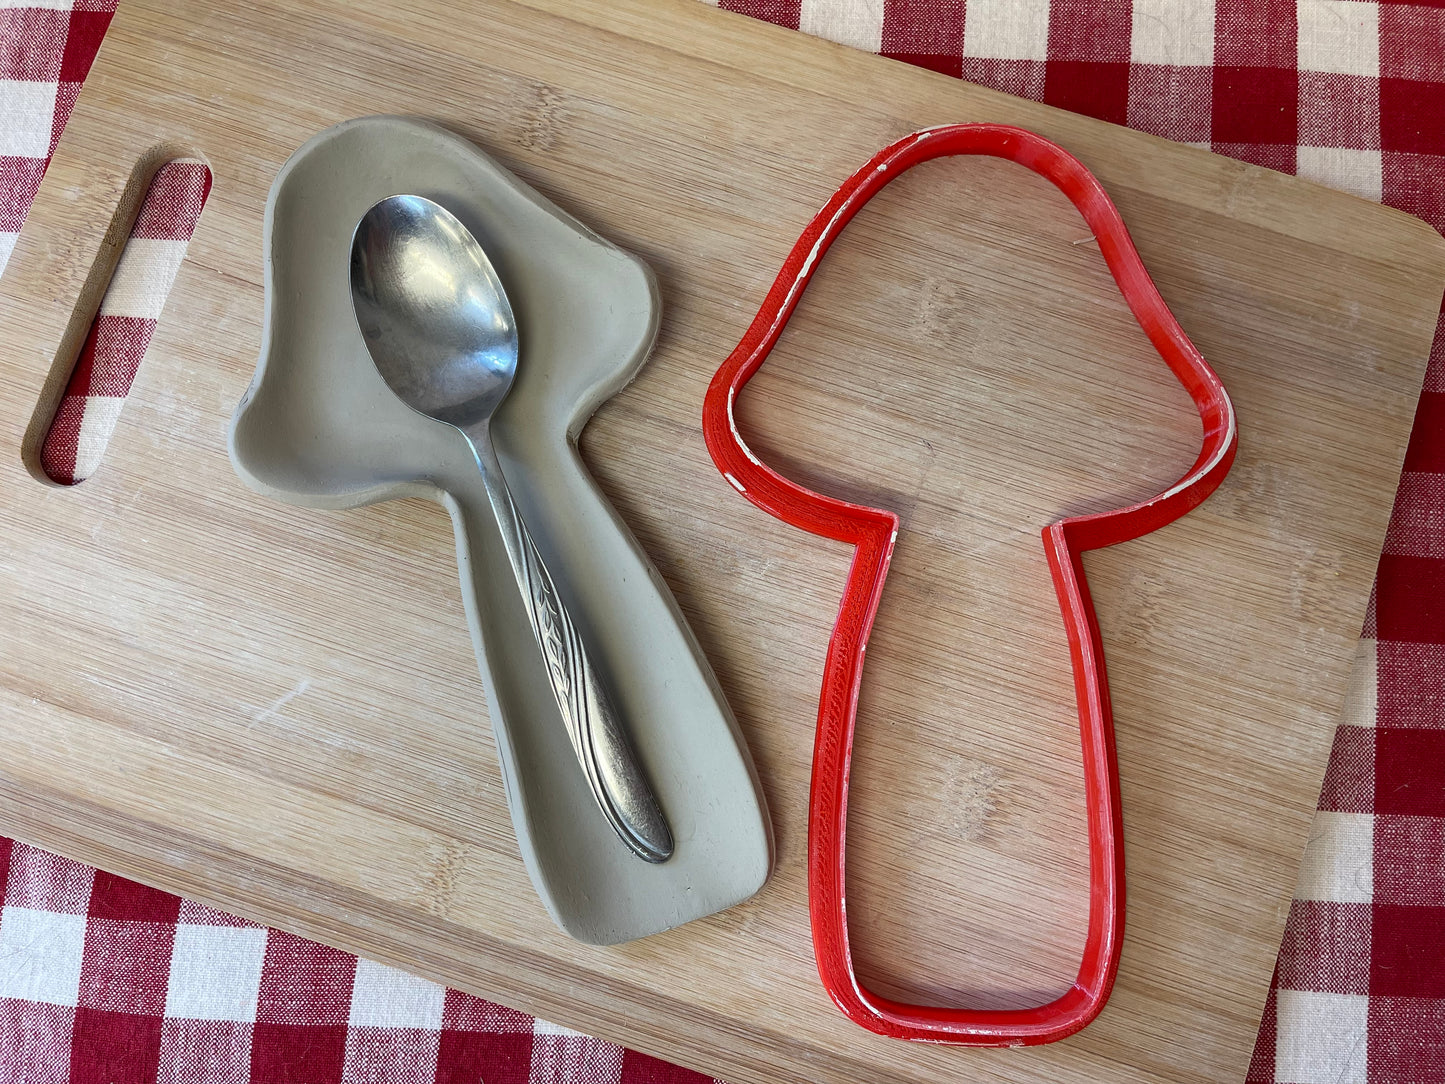 Mushroom shaped, spoon rest cutter - Plastic 3D printed, pottery tool,  choose size